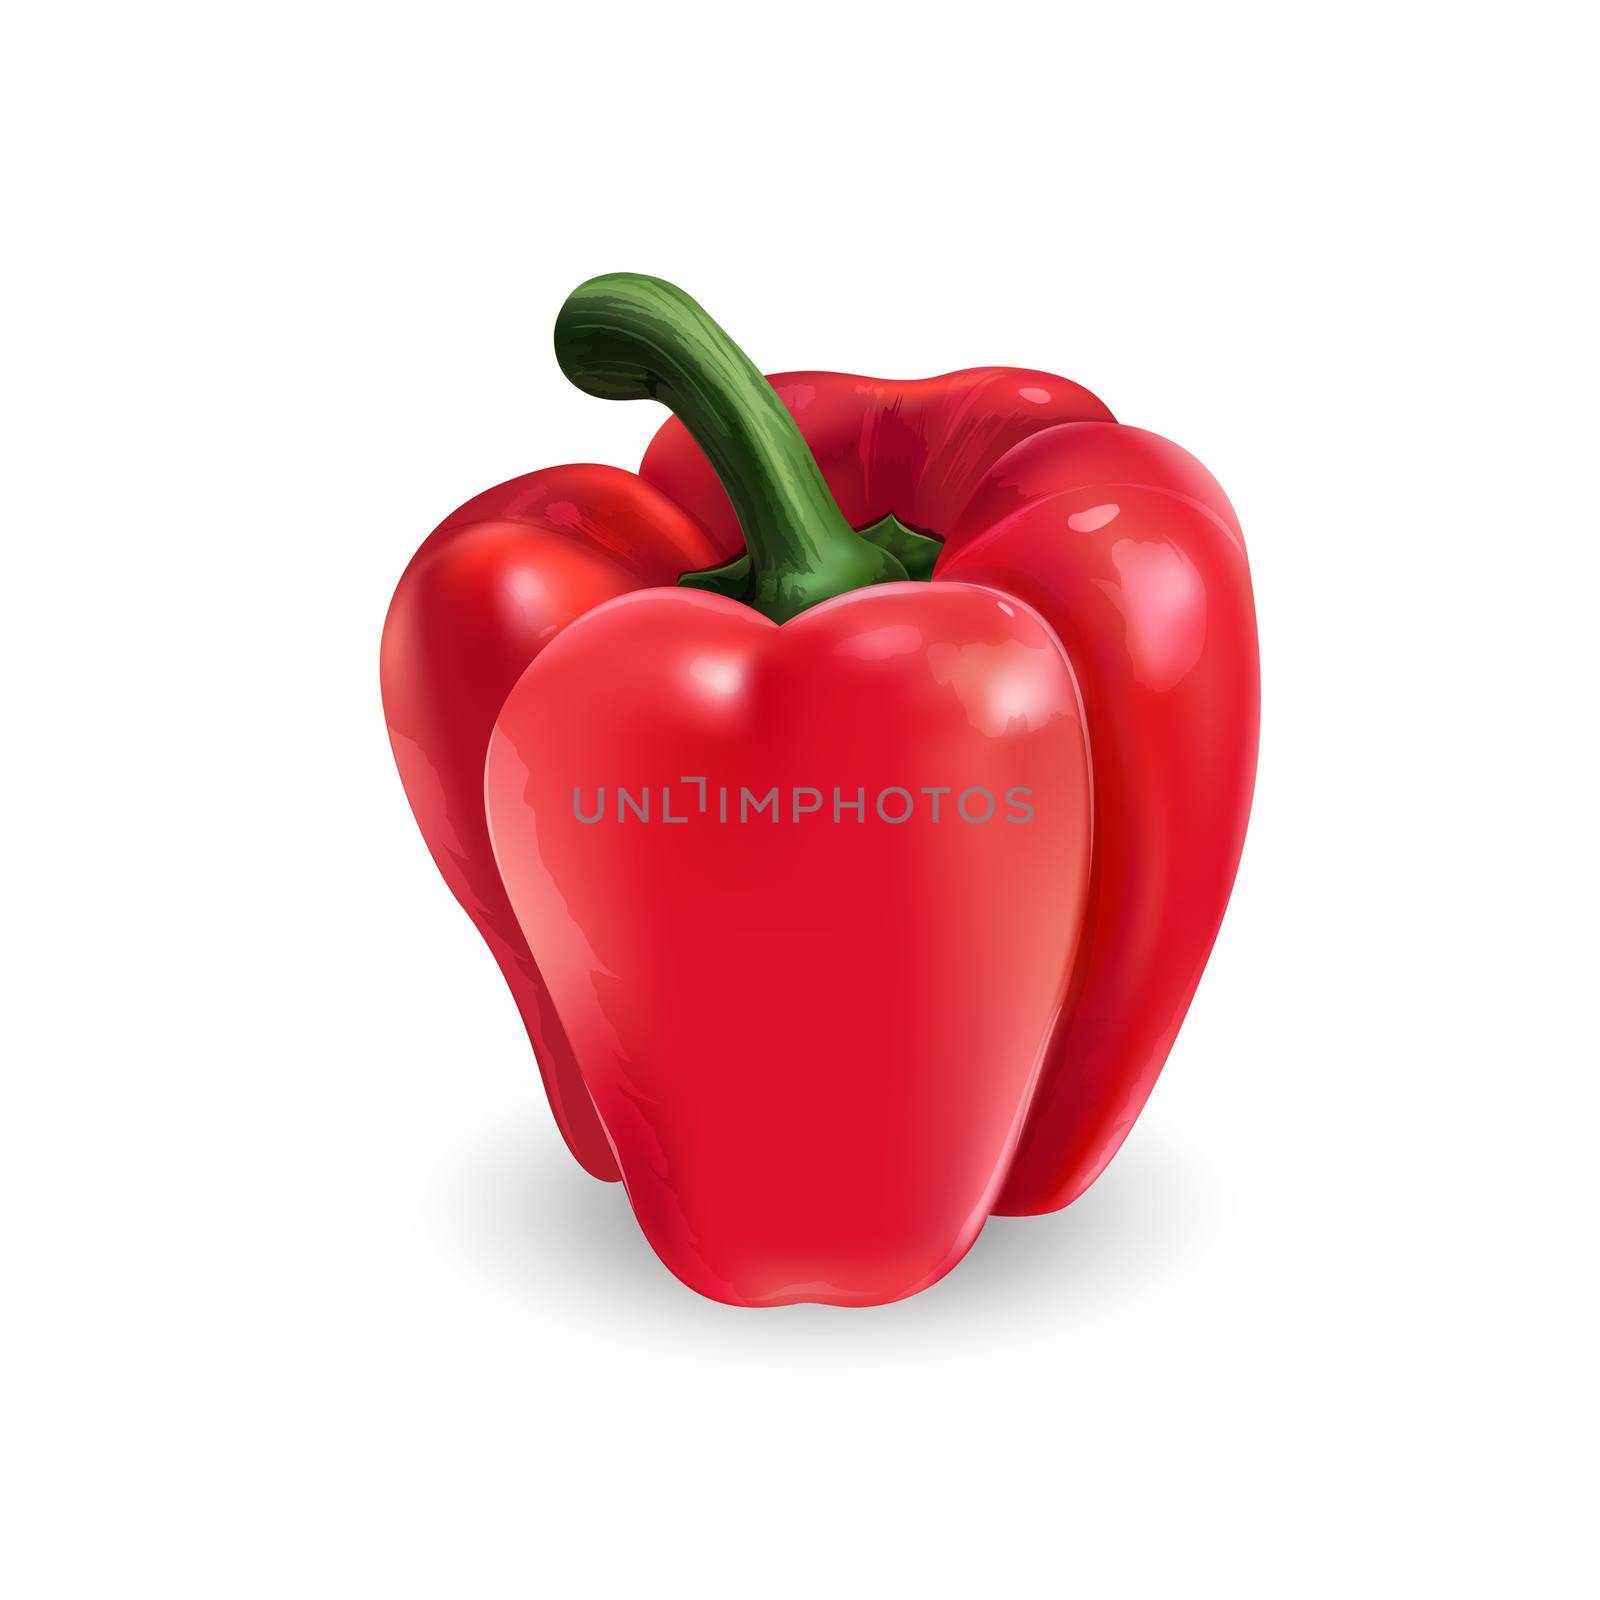 Fresh red bell pepper - healthy food design. Realistic style illustration.